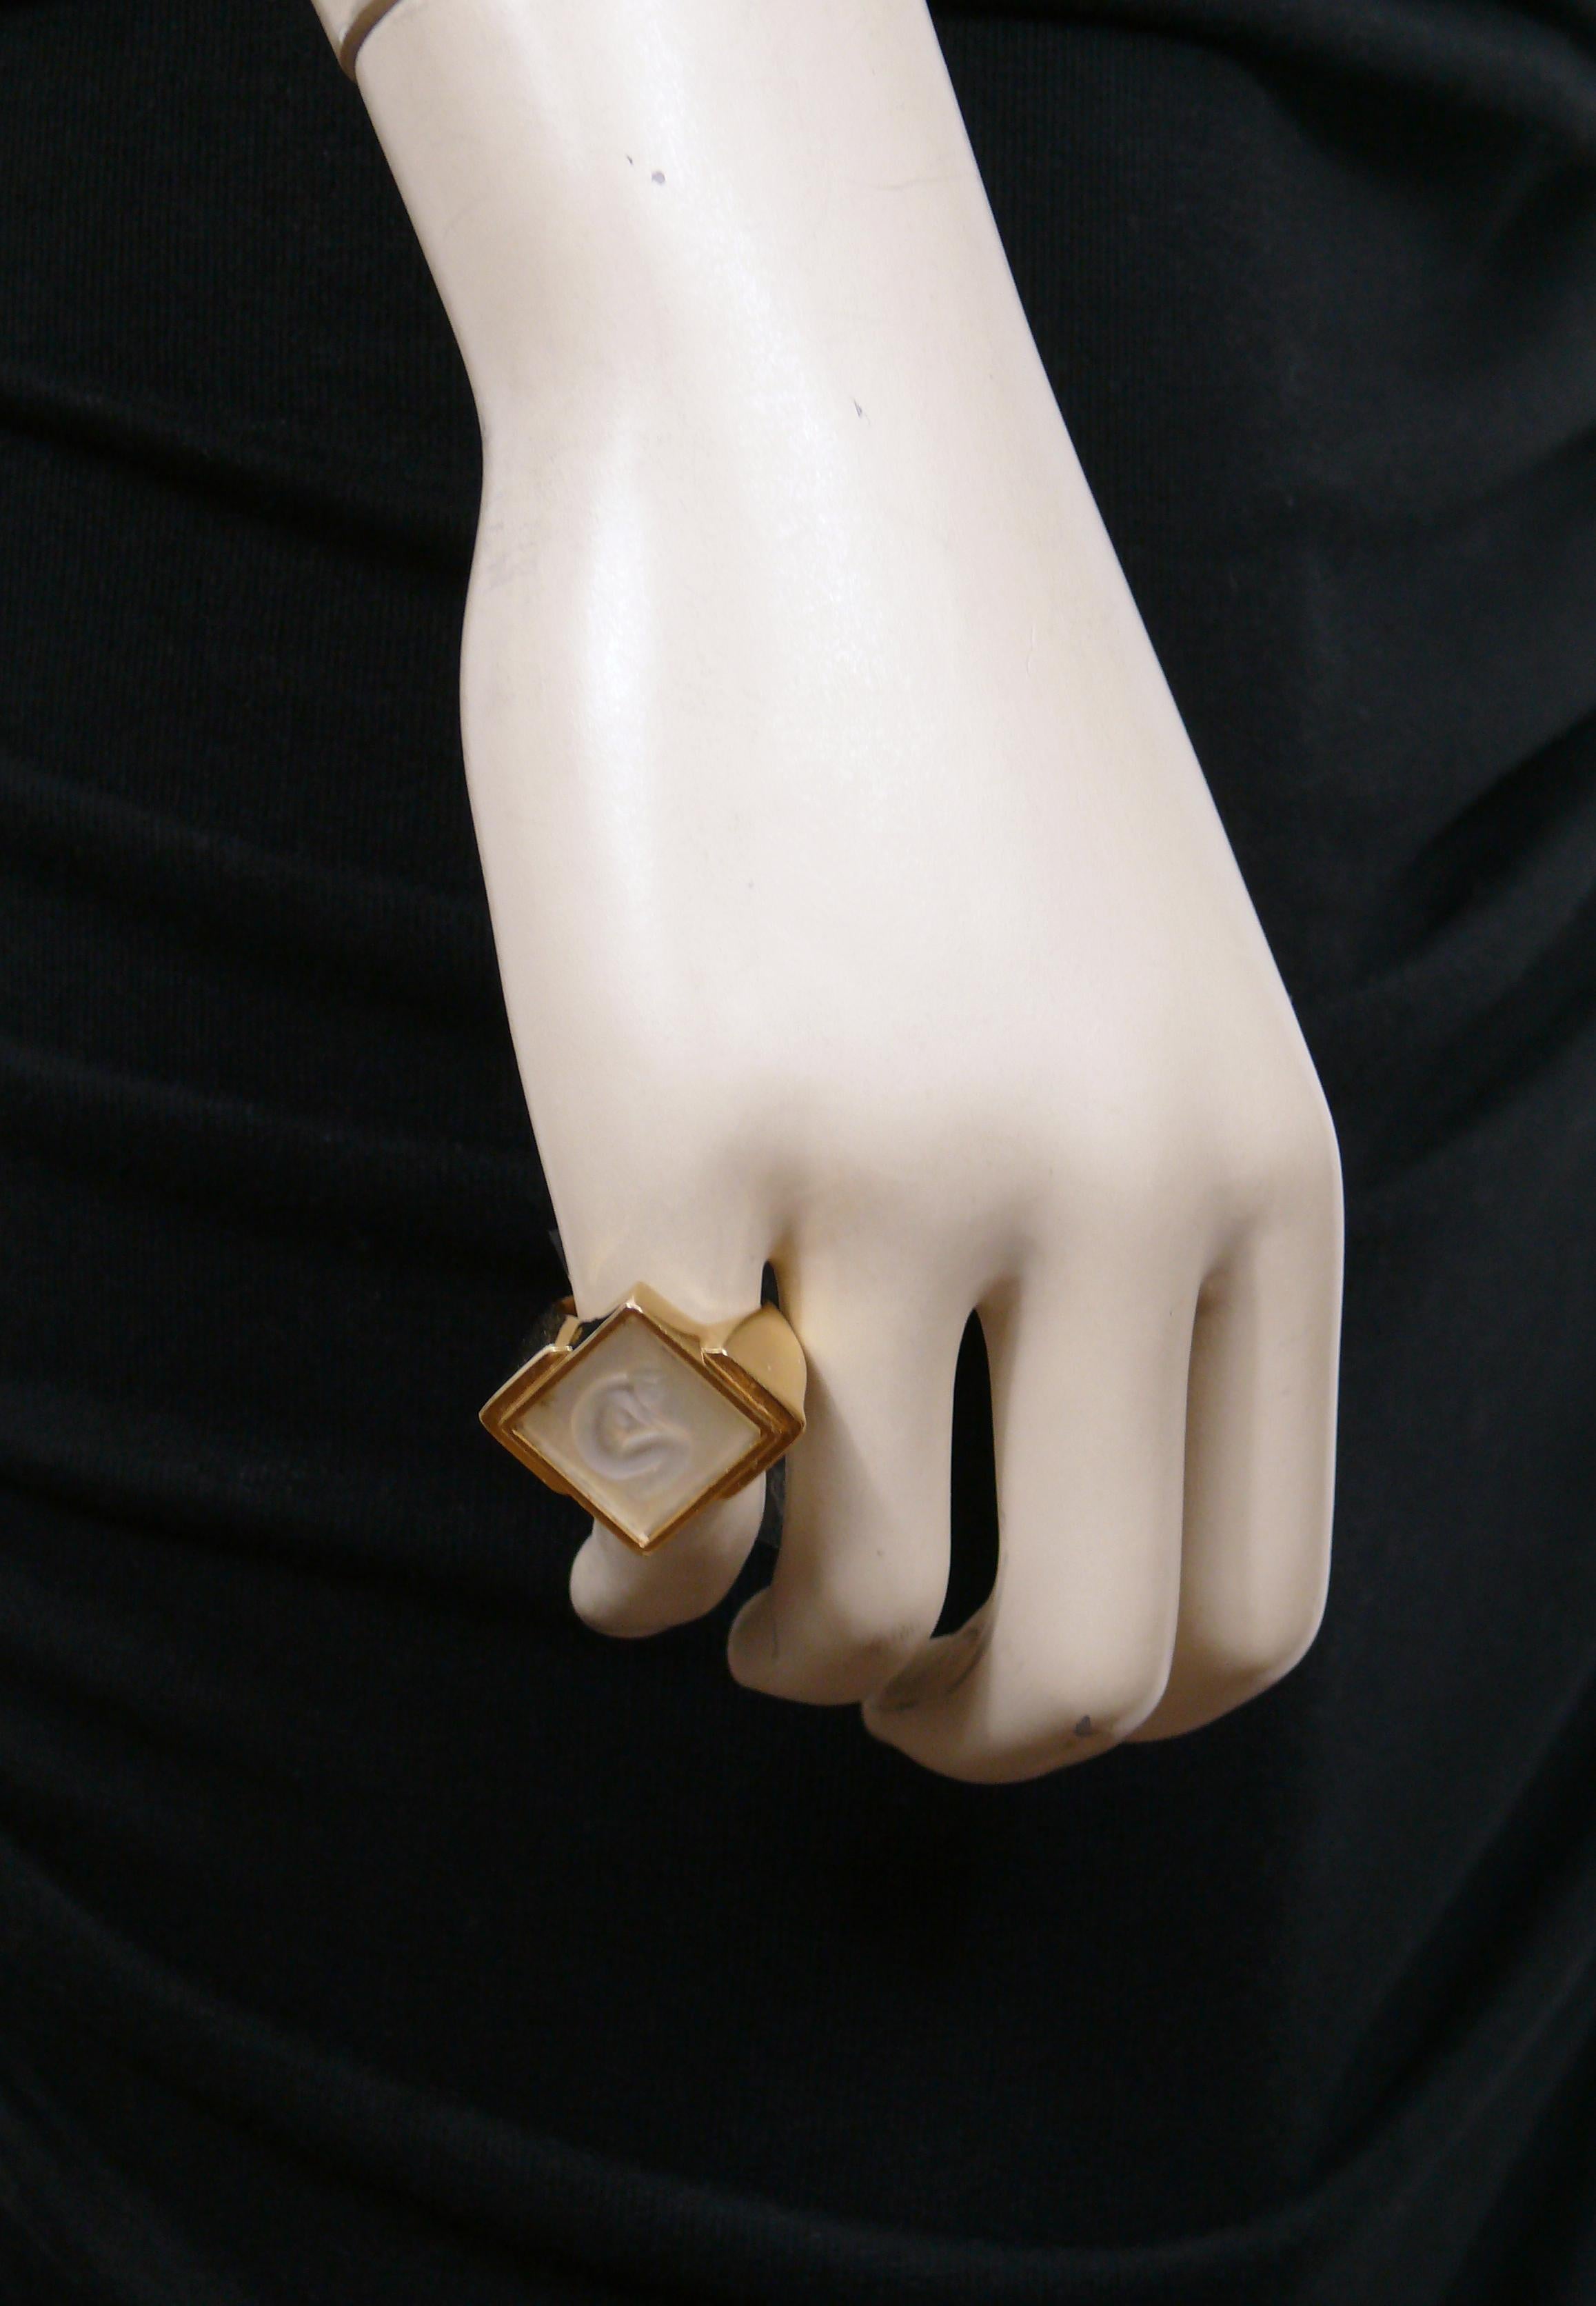 LALIQUE vintage crystal Ondine water nymph tank ring.

Embossed LALIQUE.

Indicative measurements : inner circumference approx. 5.03 cm (1.98 inches).

Material : Gold tone metal hardware / Crystal.

NOTES
- This is a preloved vintage item,